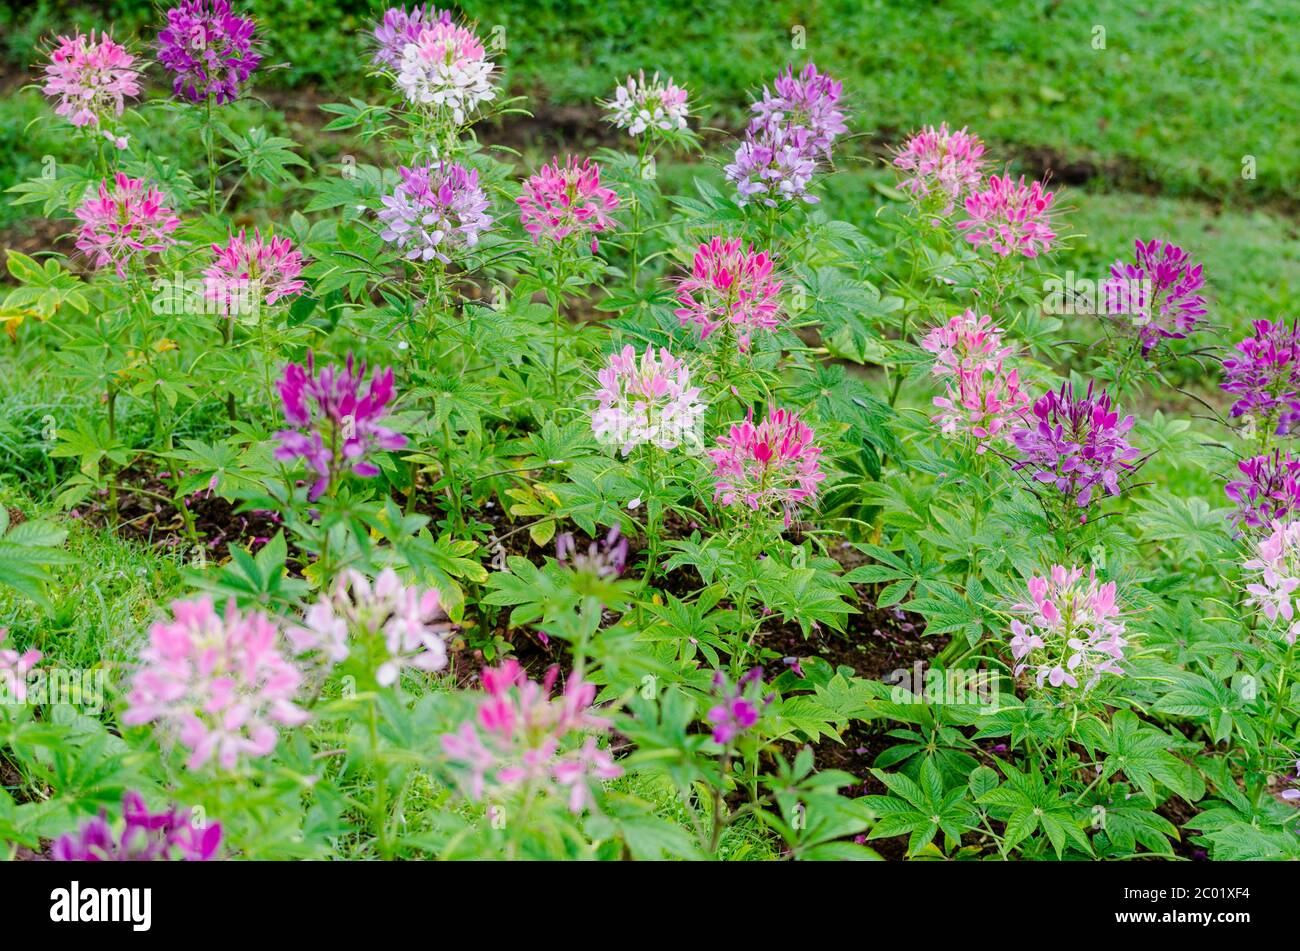 Garden flowers of Cleome with multi-colored Stock Photo